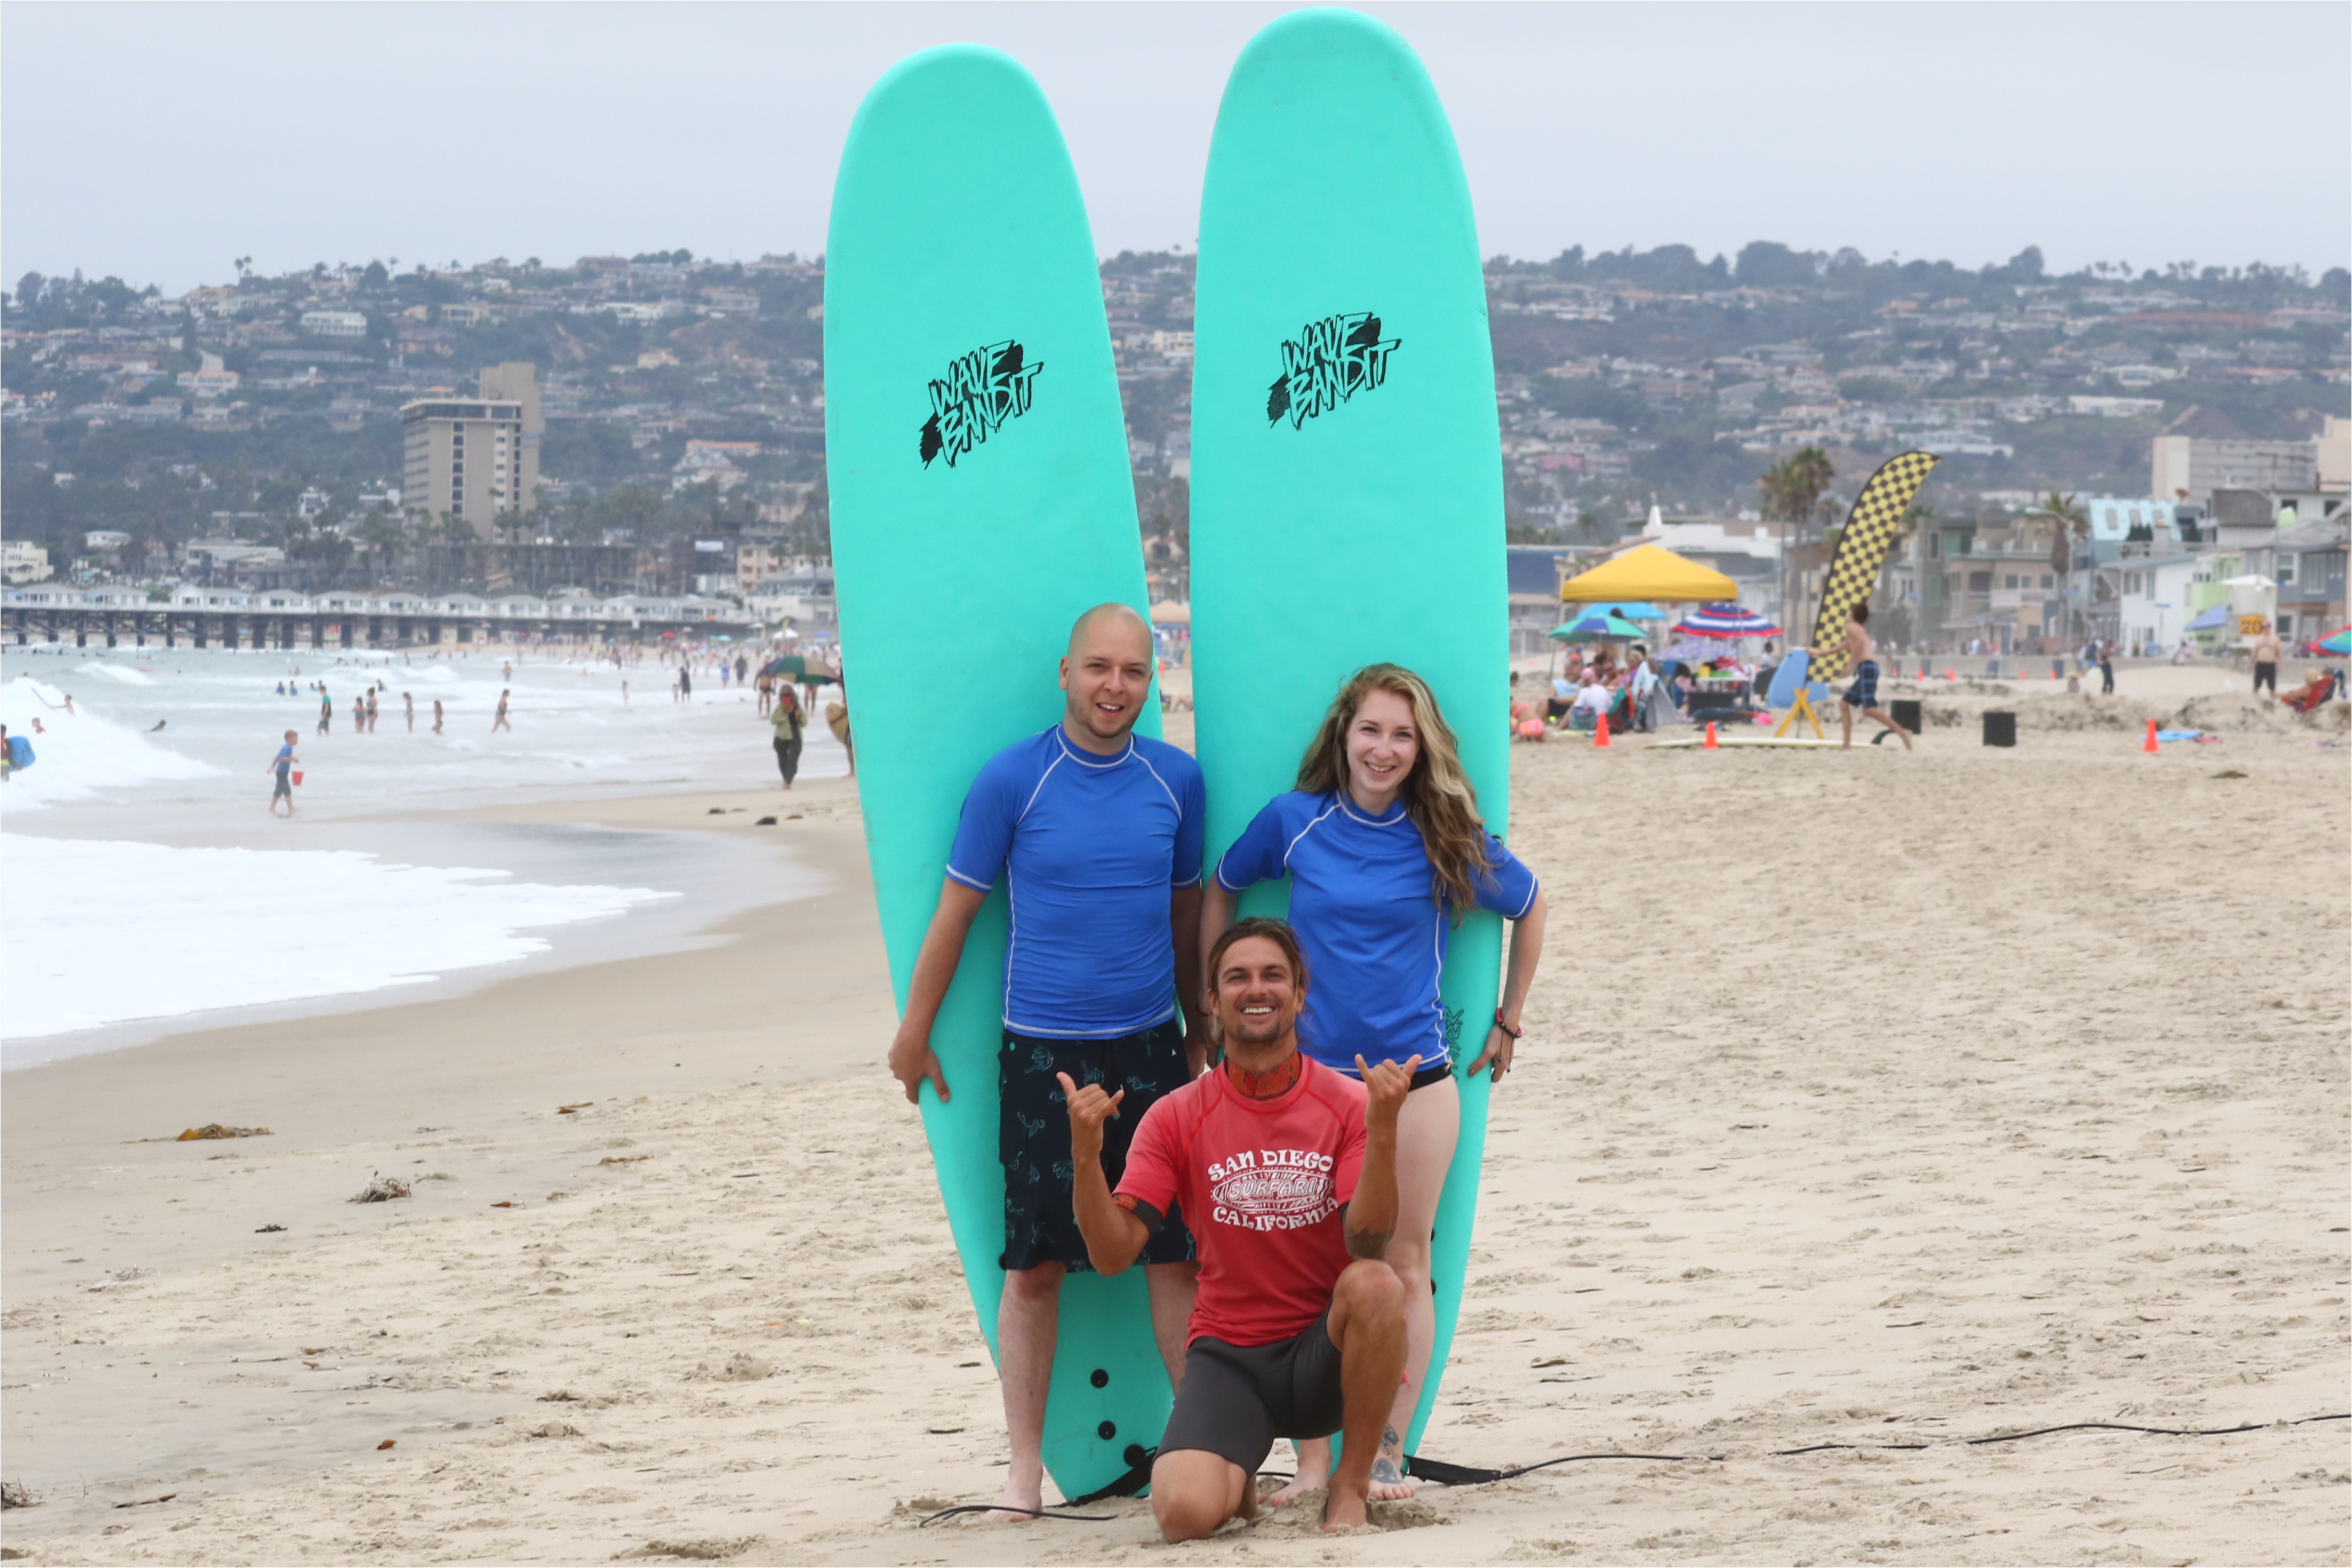 san diego surf lessons learn how to surf in san diego with surfari surf school we offer daily lessons from our convenient location in mission beach